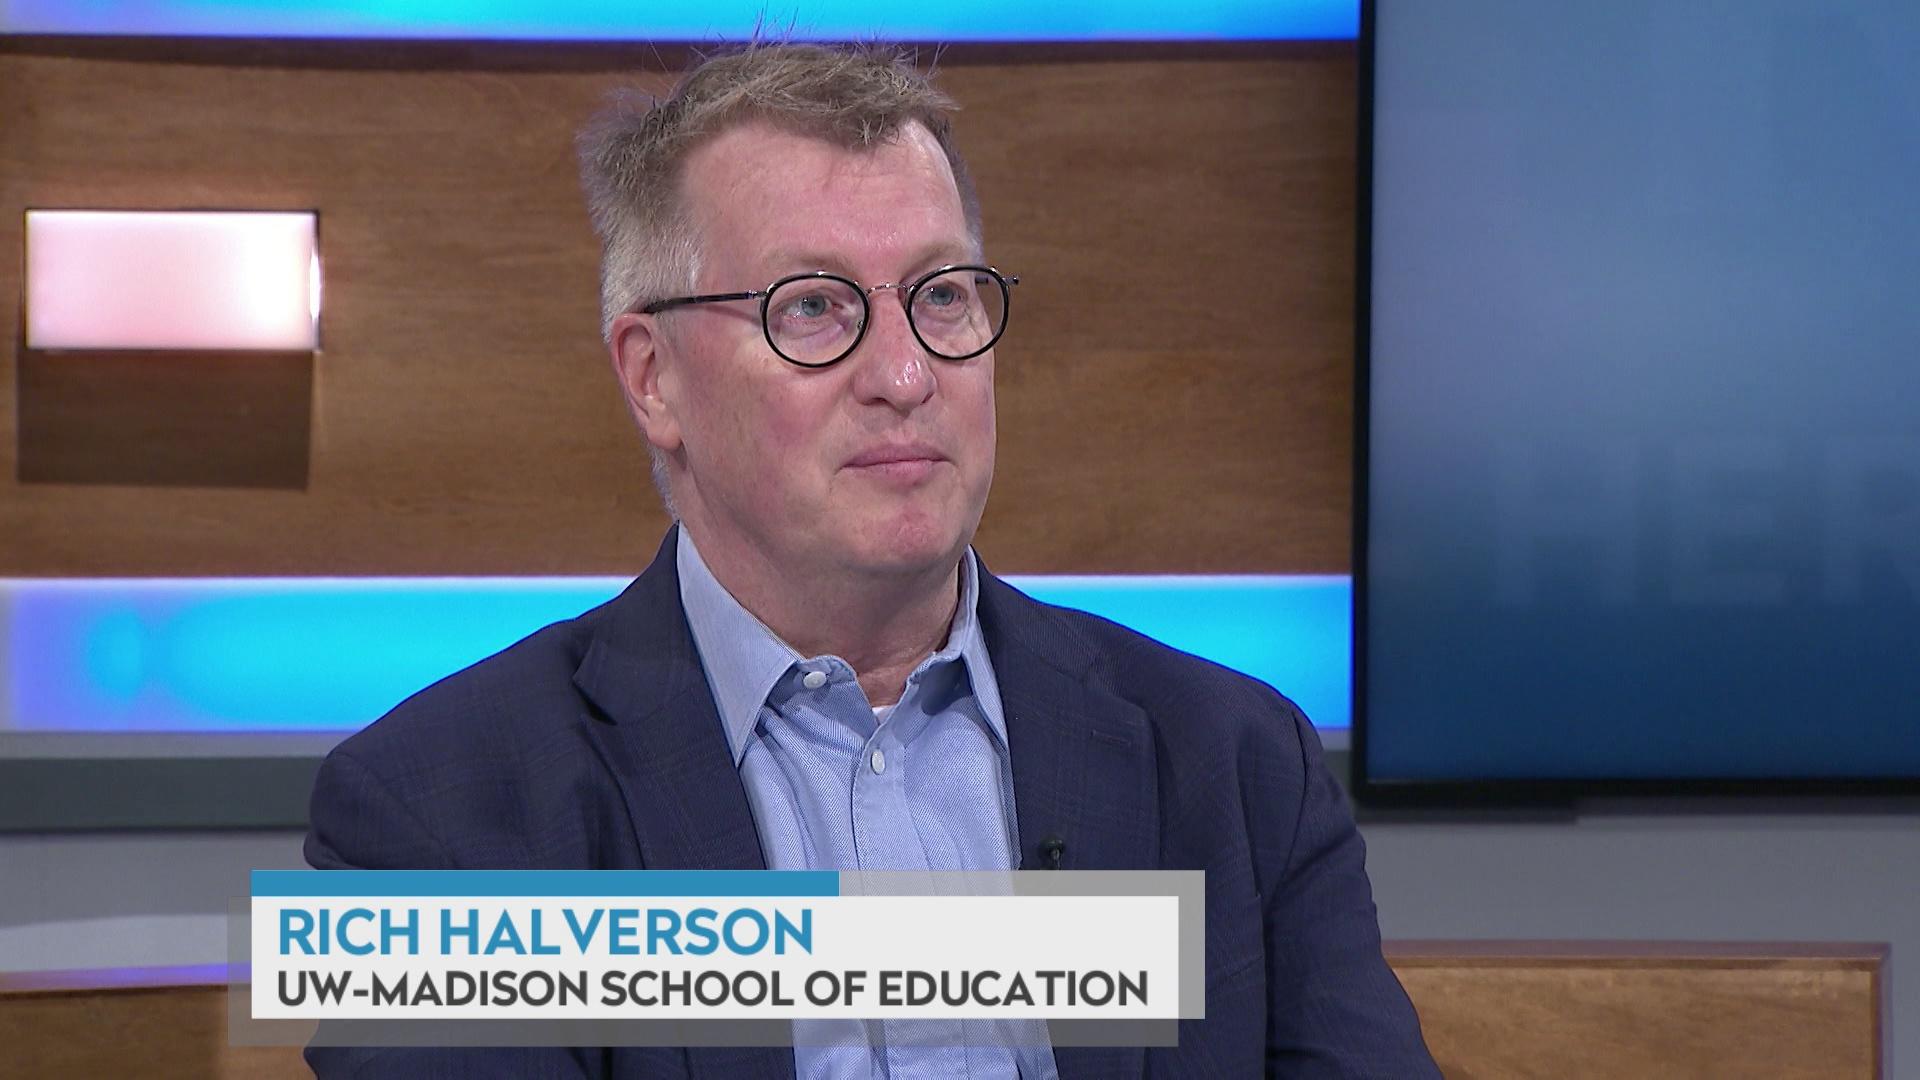 A still image shows Rich Halverson seated at the 'Here & Now' set featuring wood paneling, with a graphic at bottom reading 'Rich Halverson' and 'UW-Madison School of Education.'